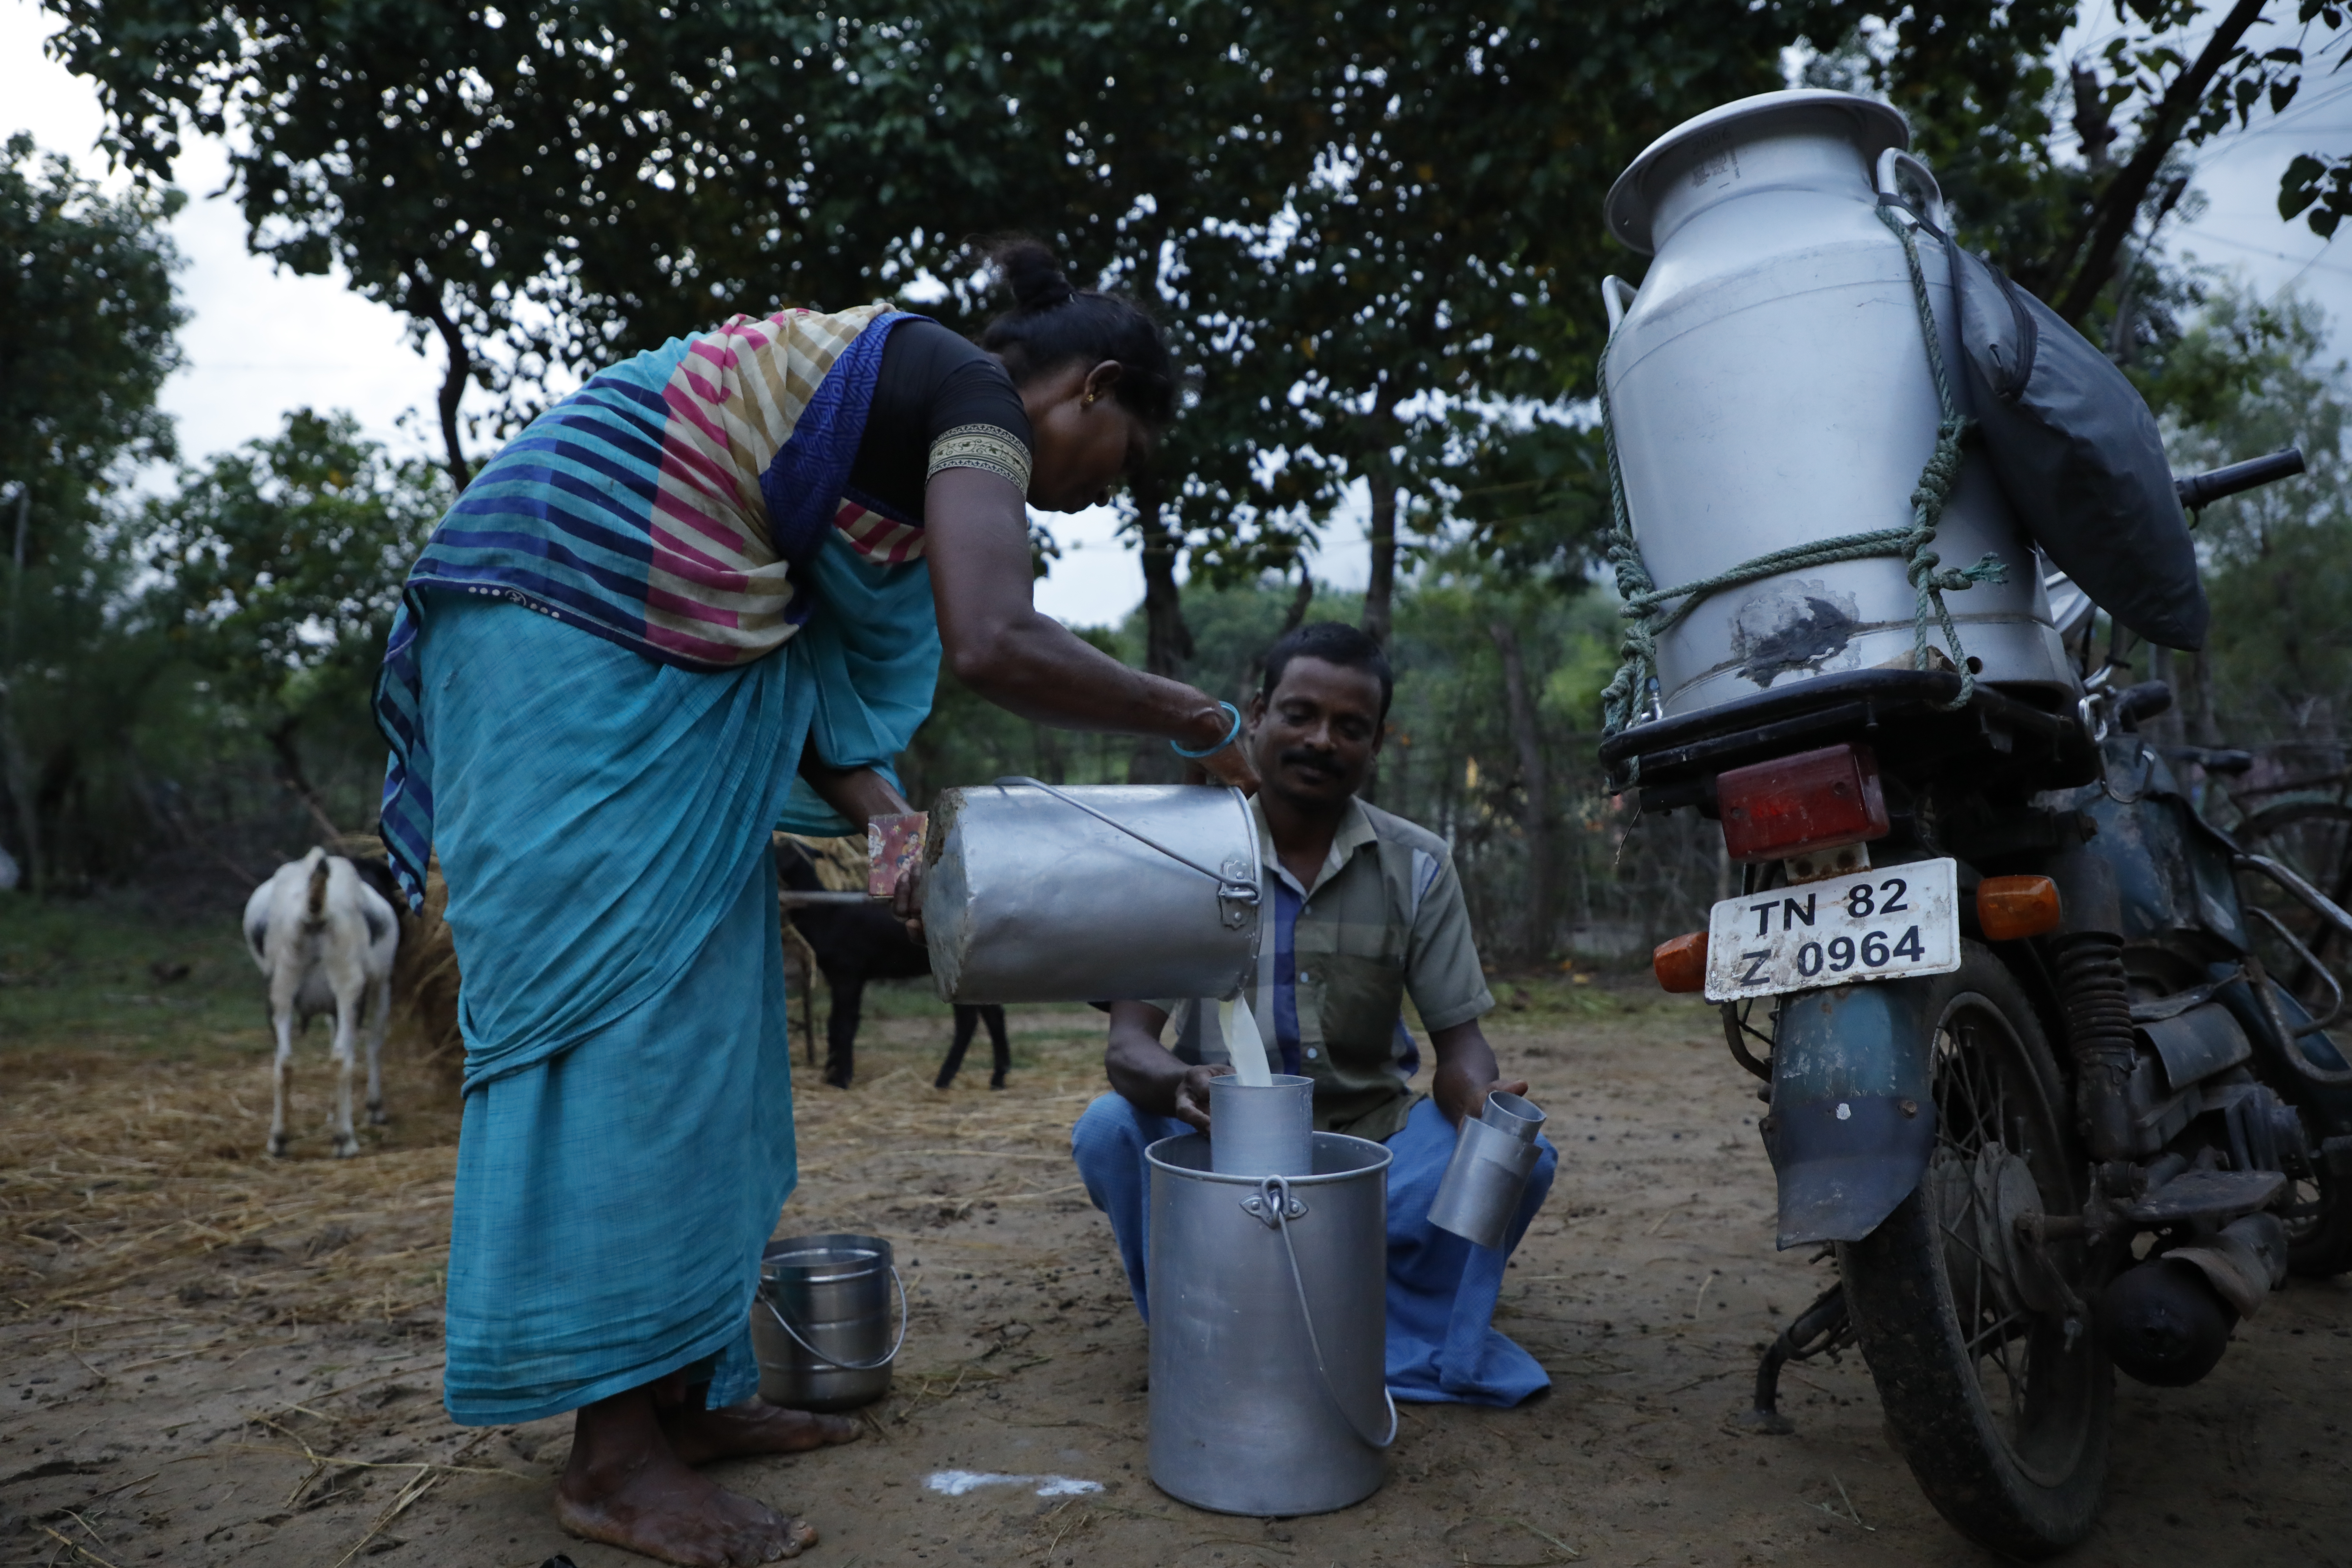 A woman sells milk to a vendor in Tamil Nadu, photo credit to MSSRF